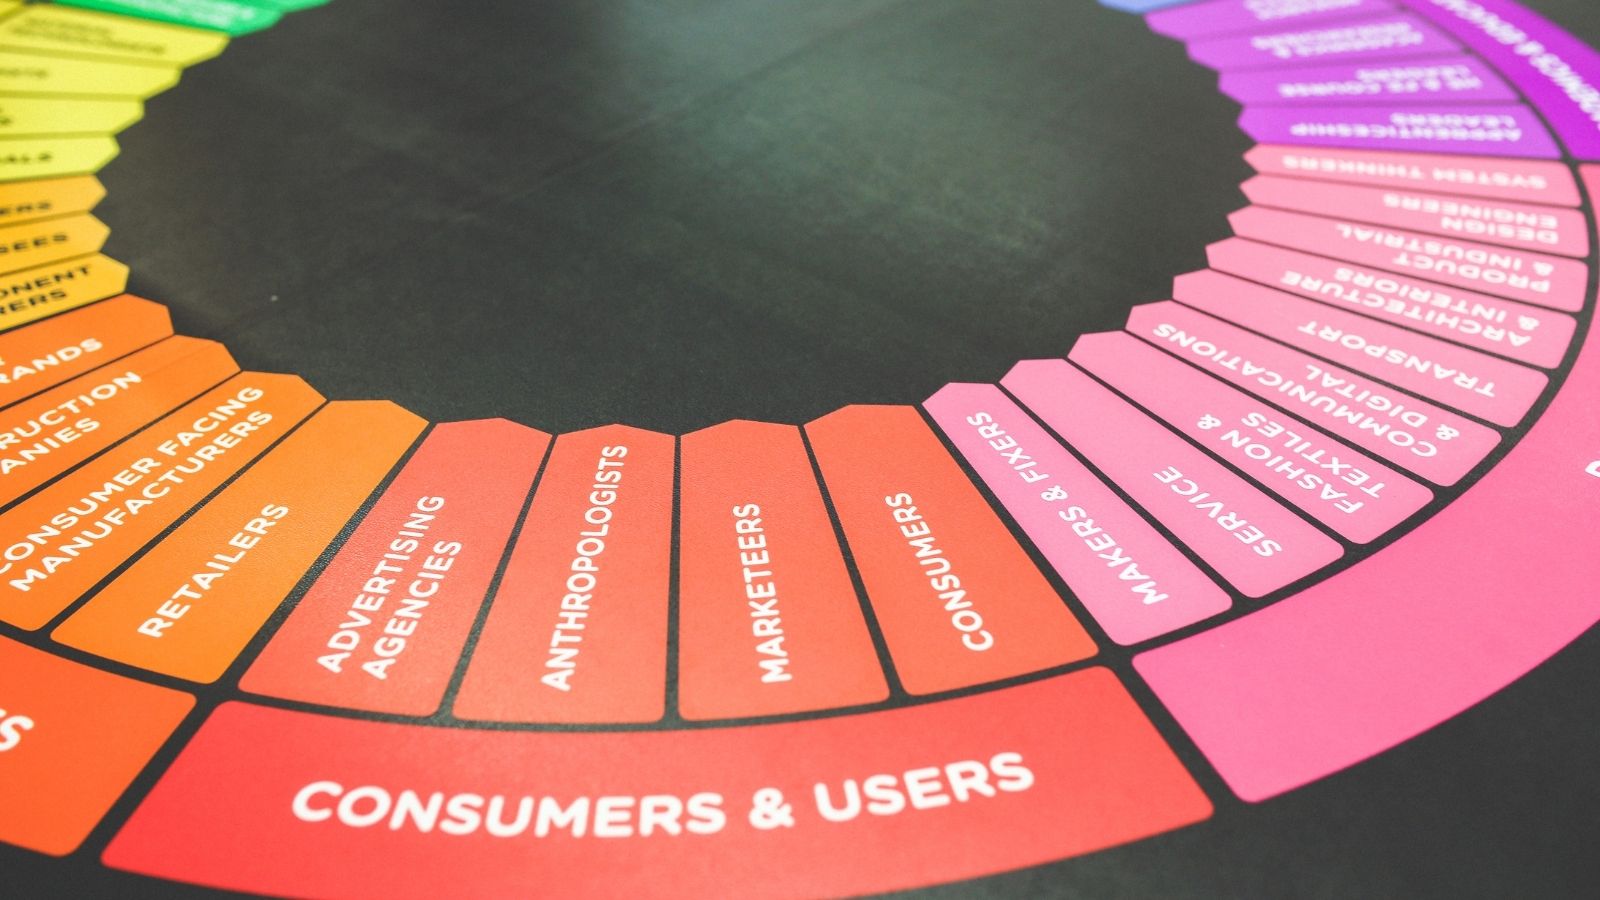 Is Conscious Marketing the Future Approach for Brands?